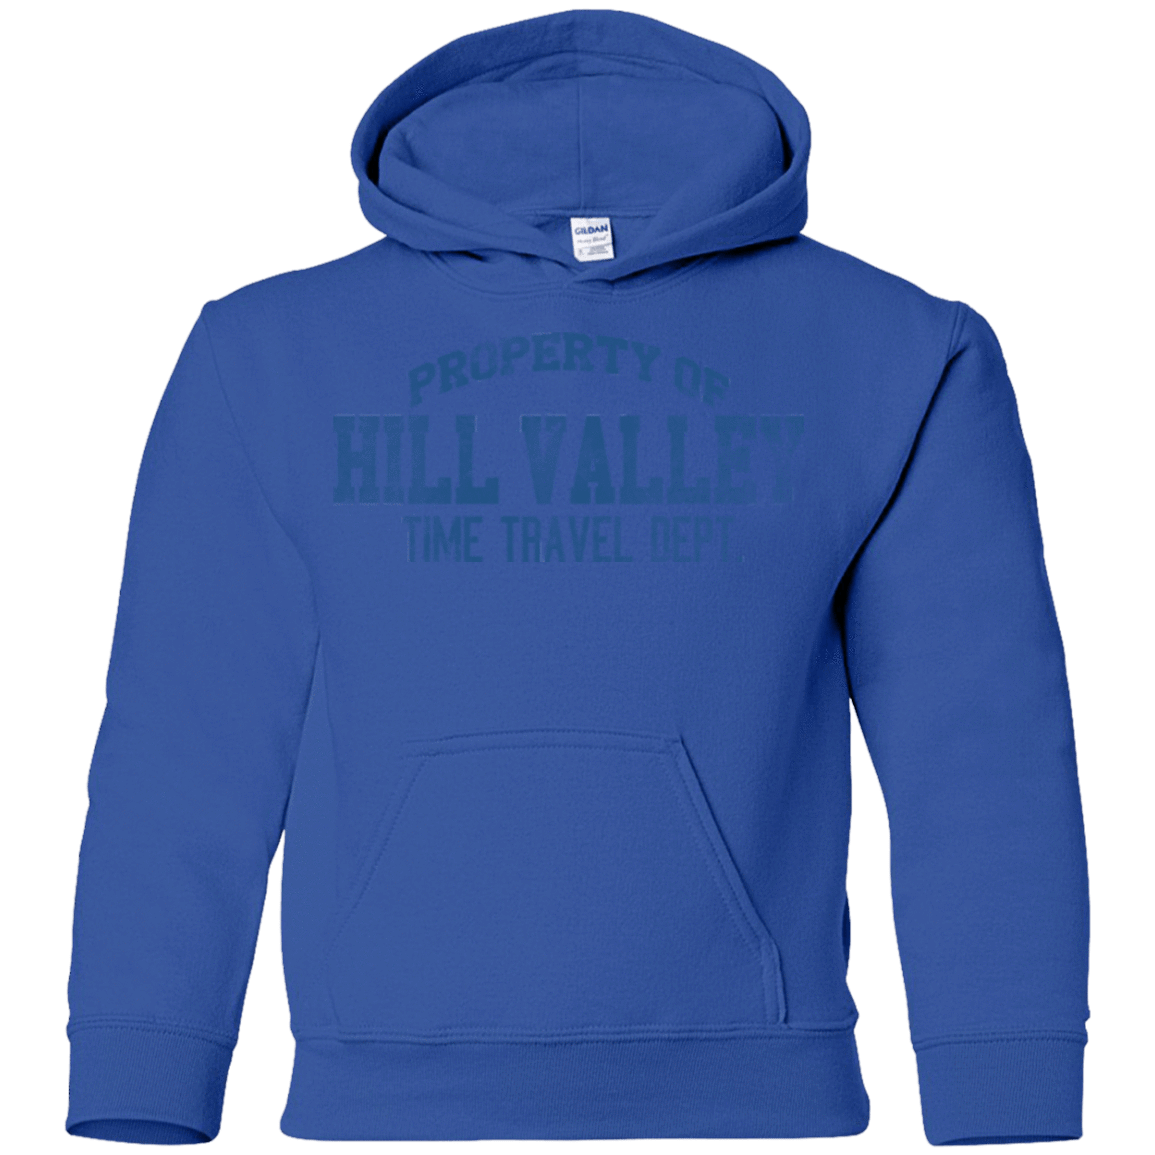 Sweatshirts Royal / YS Hill Valley HS Youth Hoodie